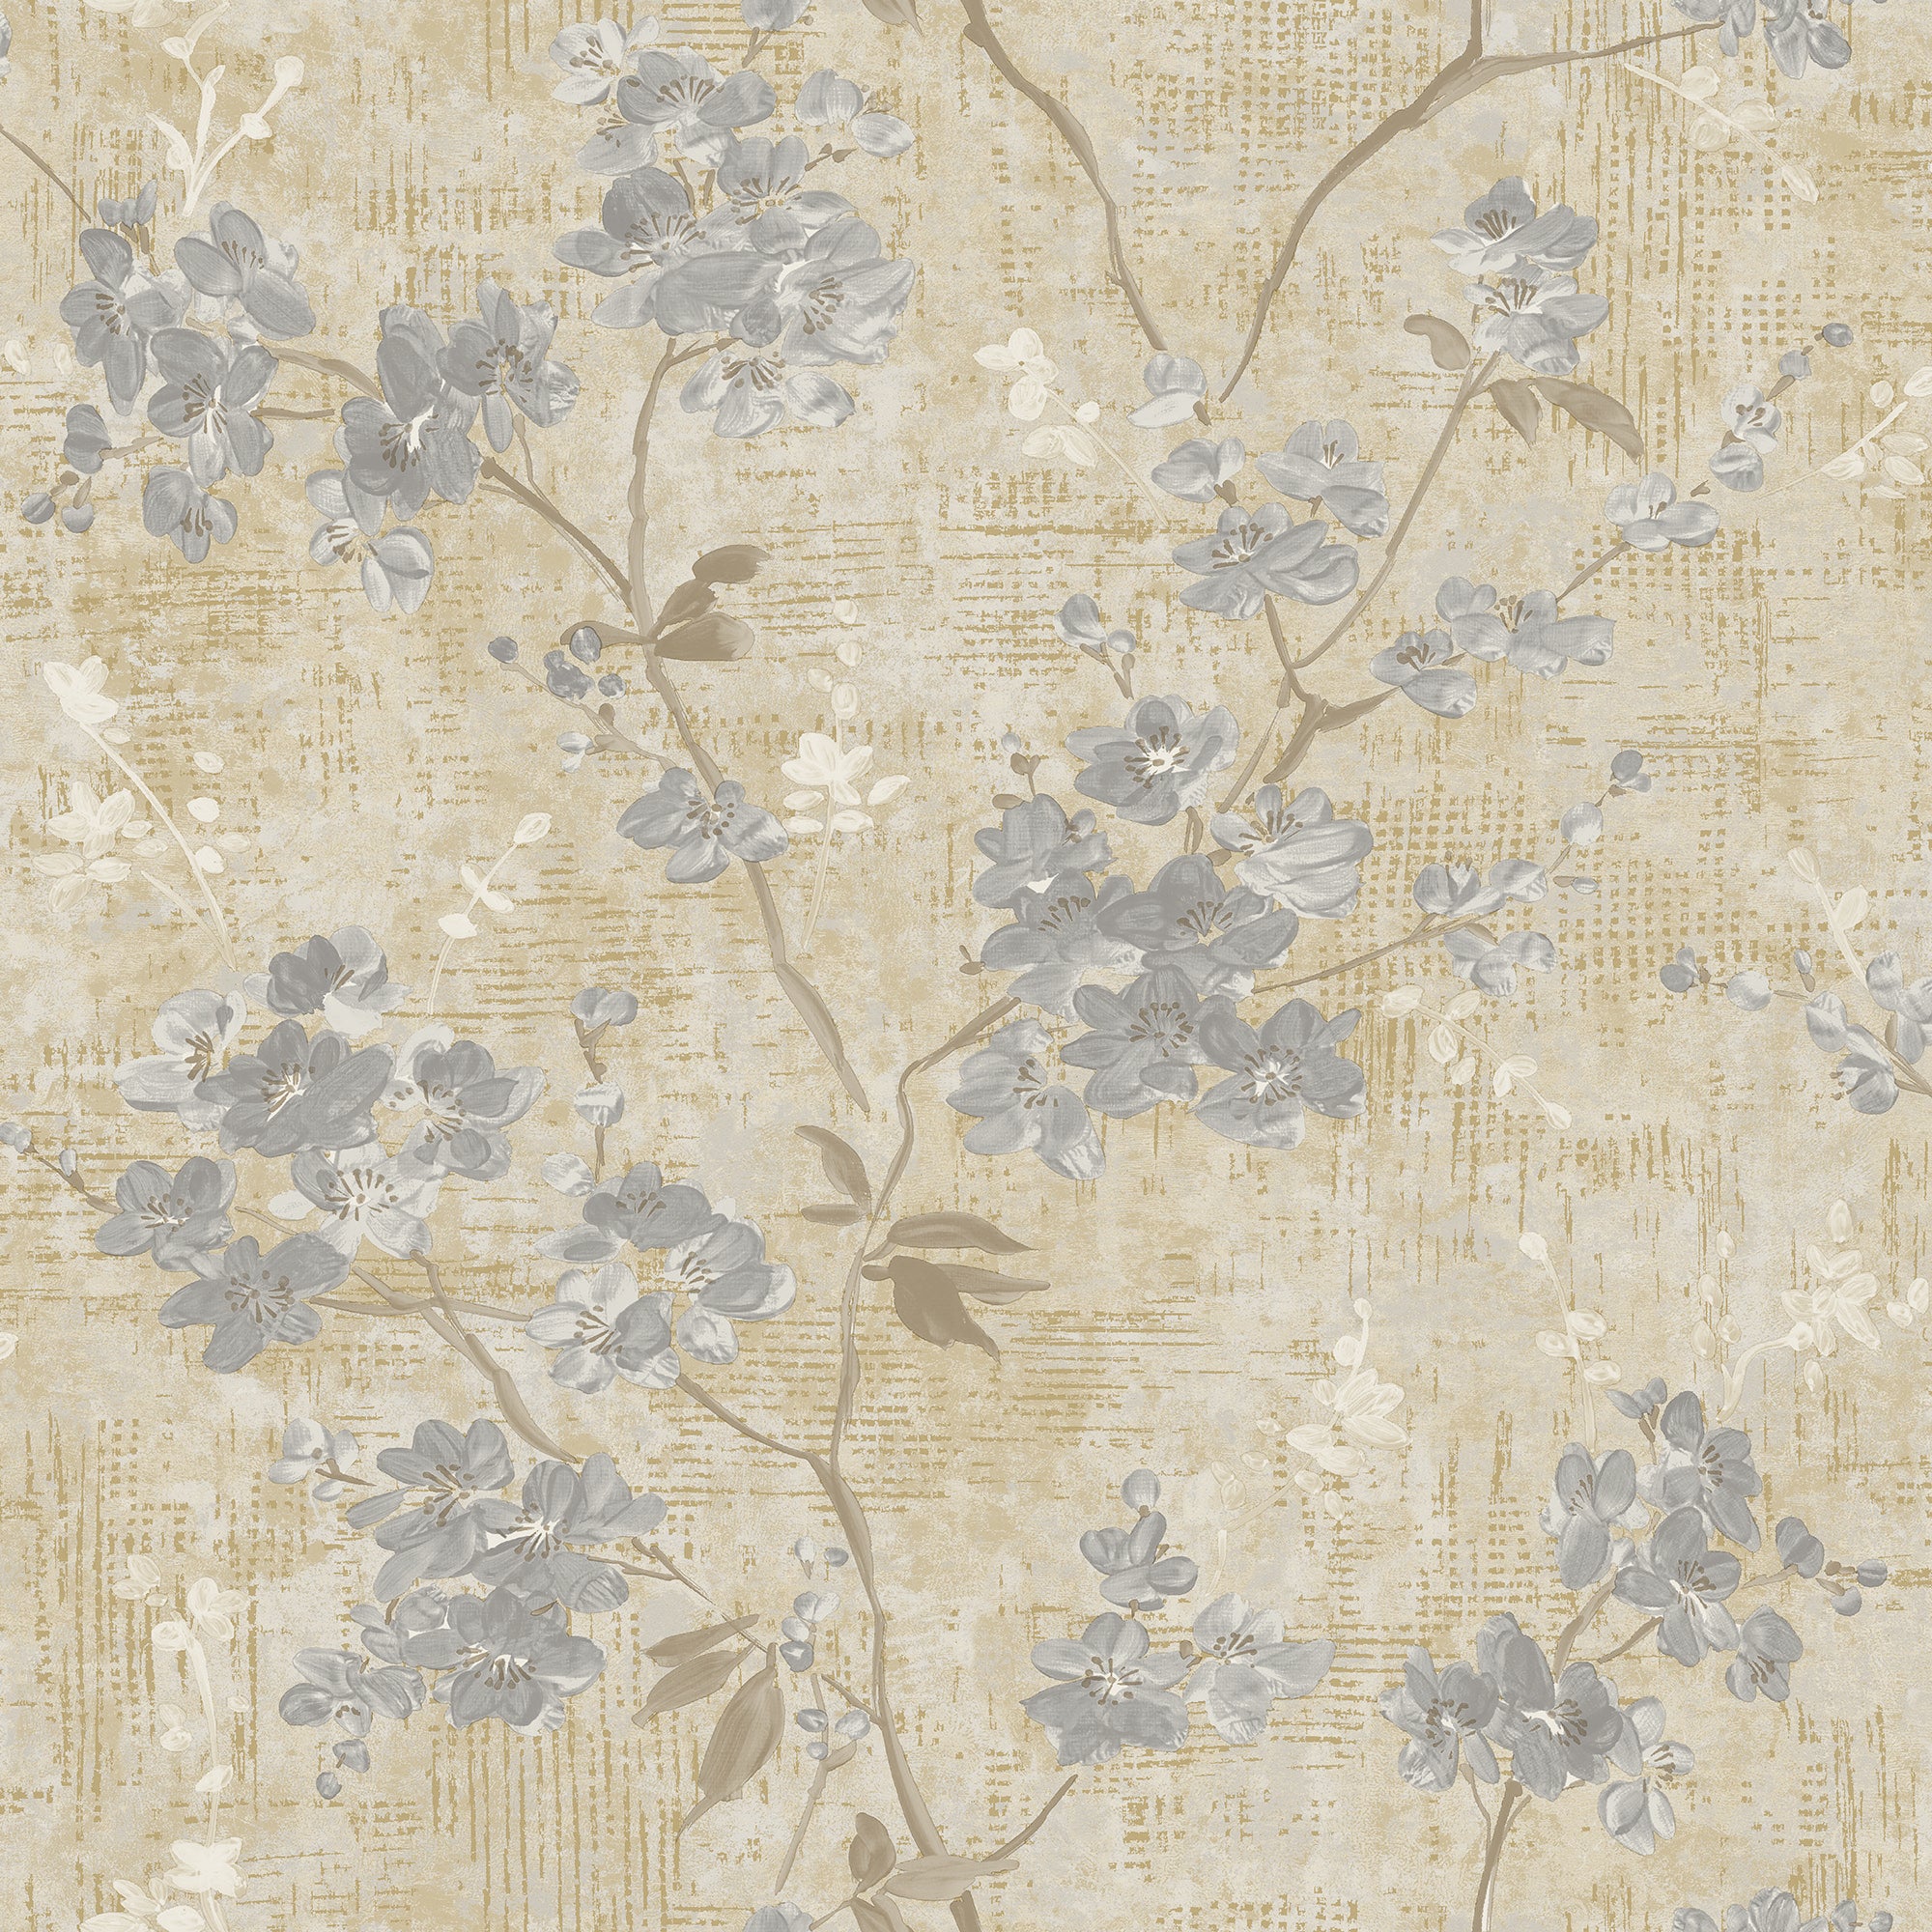 Paul Moneypenny Anethe Blossom Cream and Grey Wallpaper | 196402